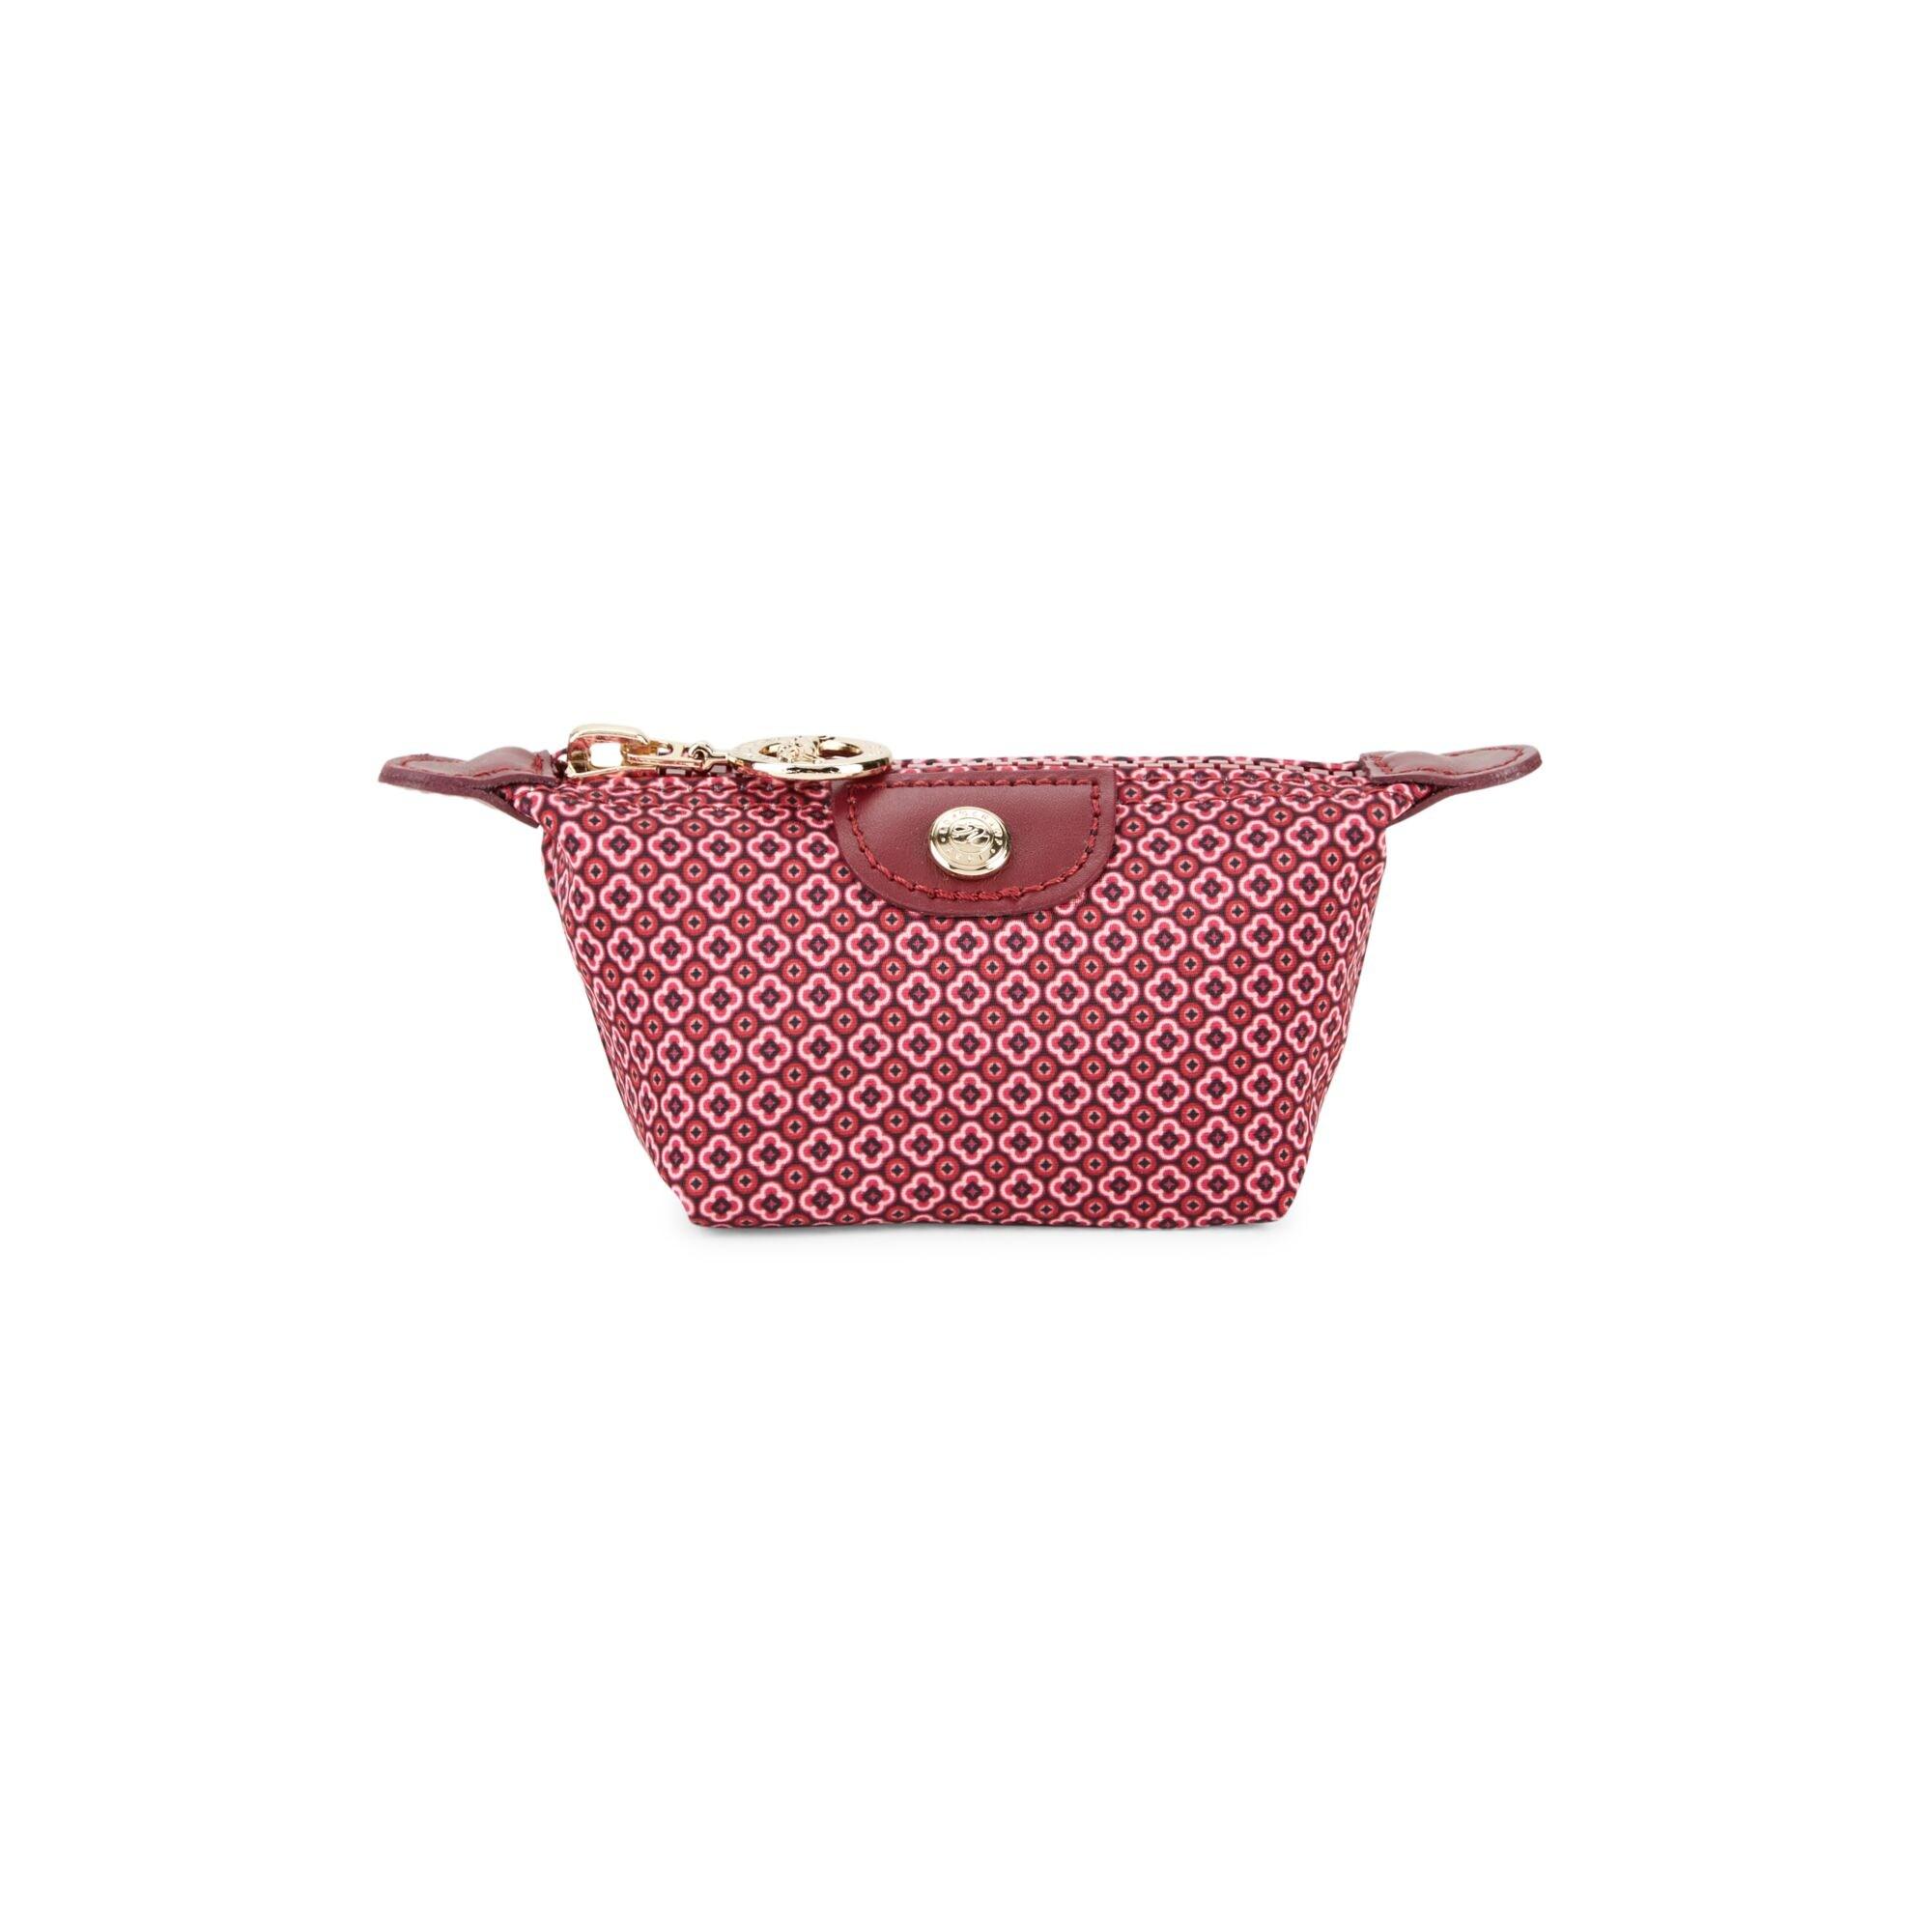 Longchamp Dandy Coin Purse in Red - Lyst